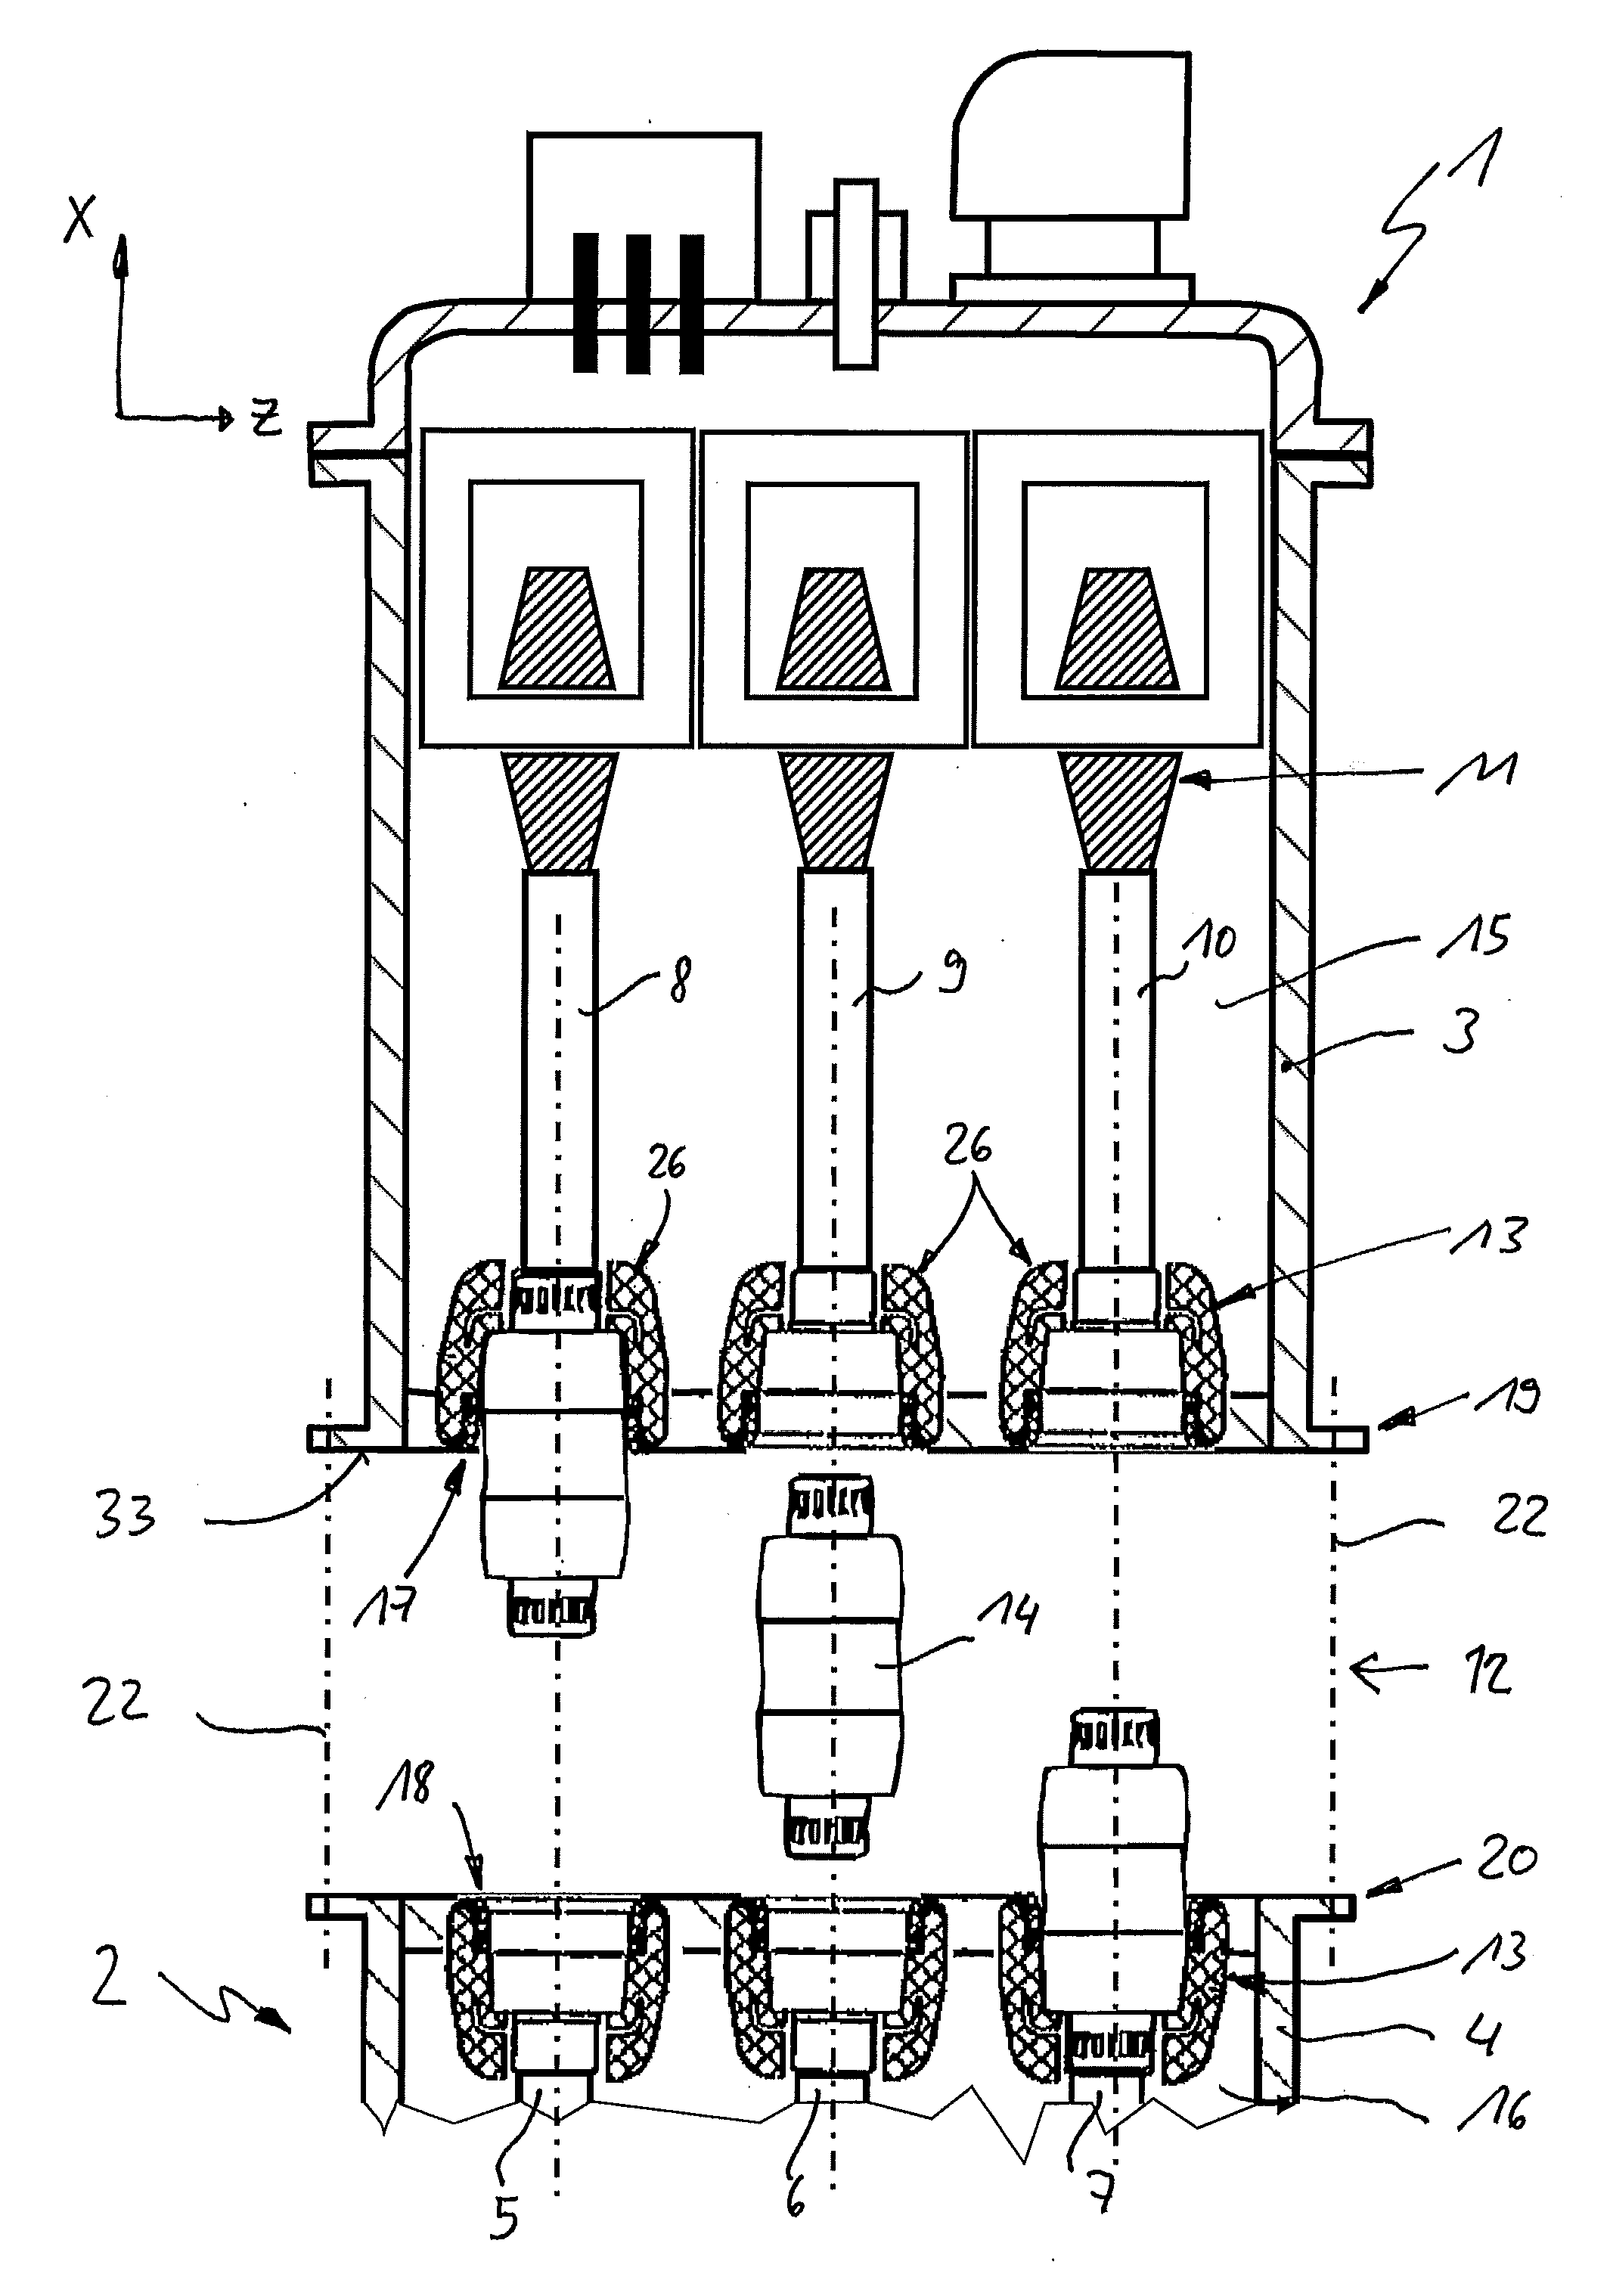 Plug-in primary power connections of two modules of a gas-insulated high-voltage switchgear assembly